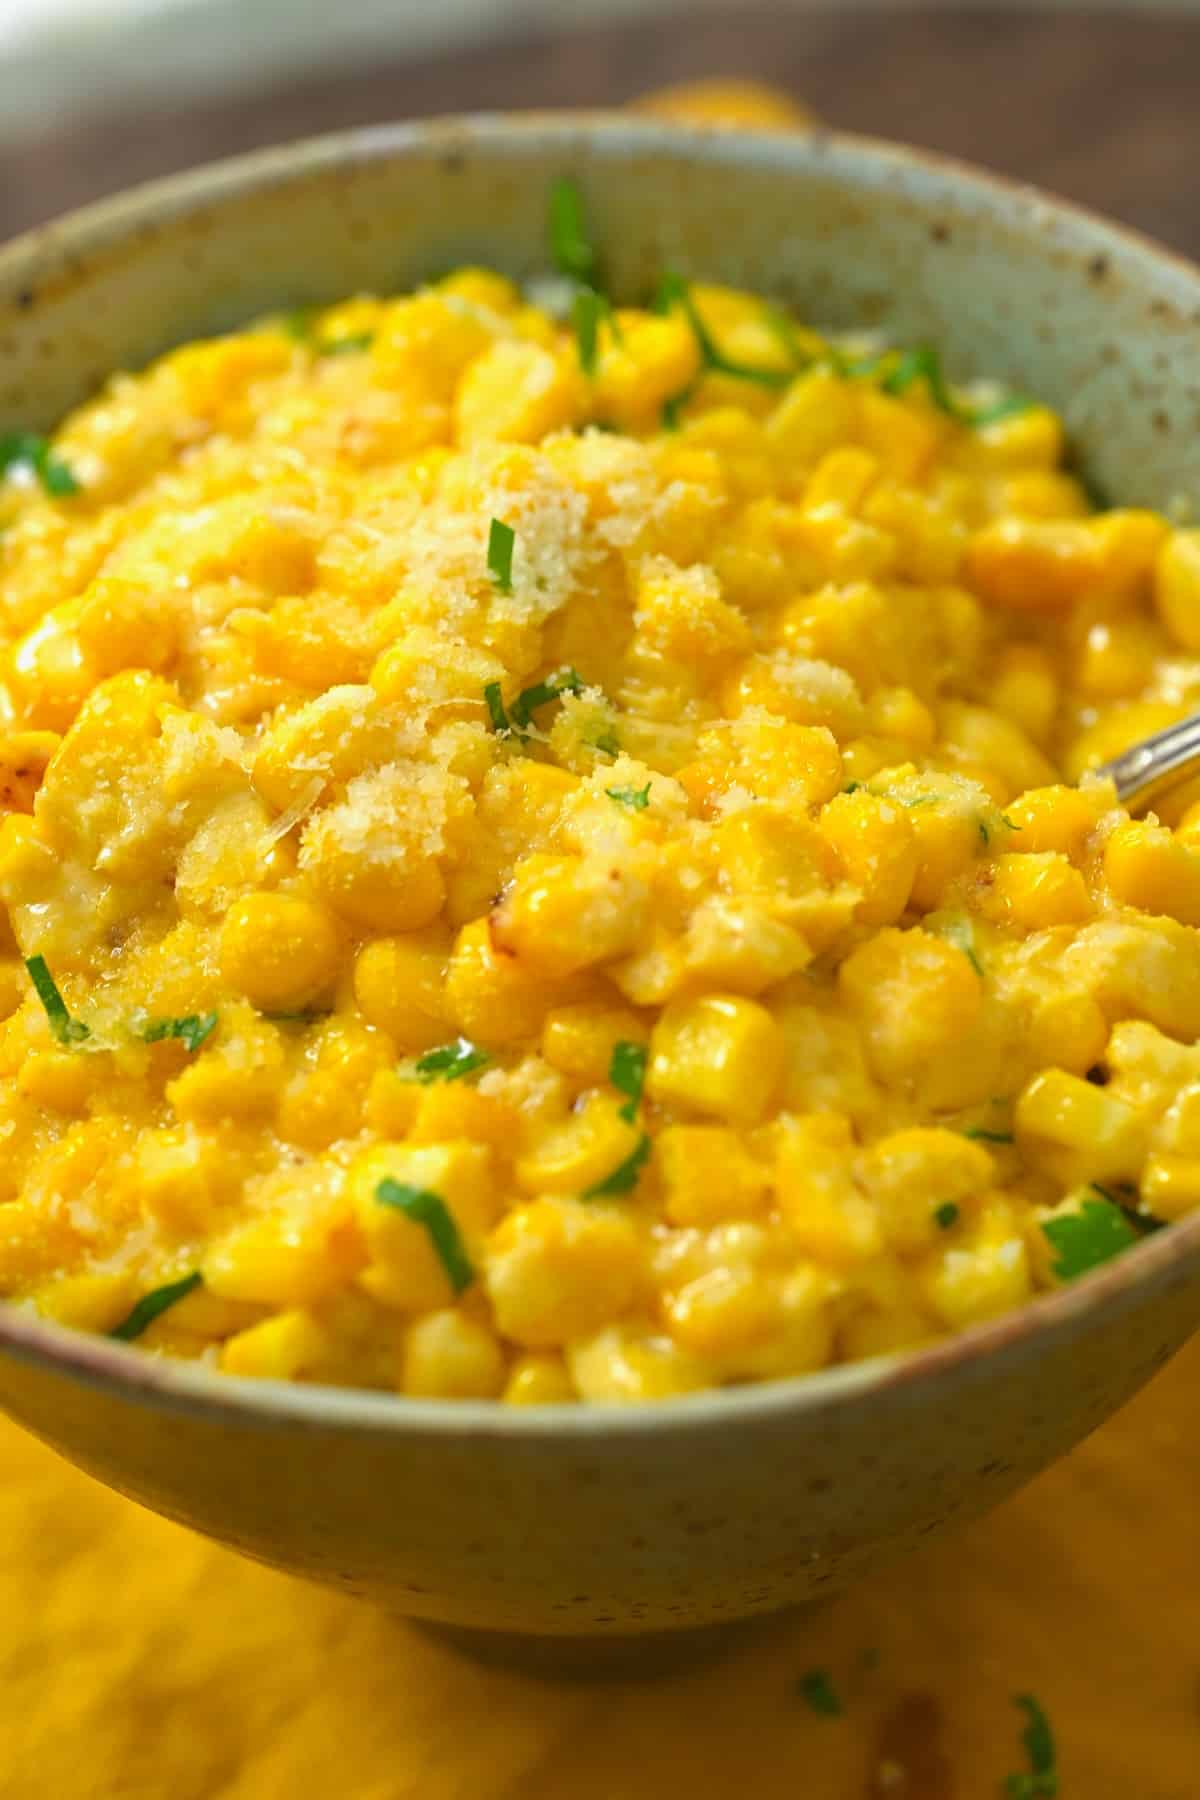 Creamed corn topped with some parmesan